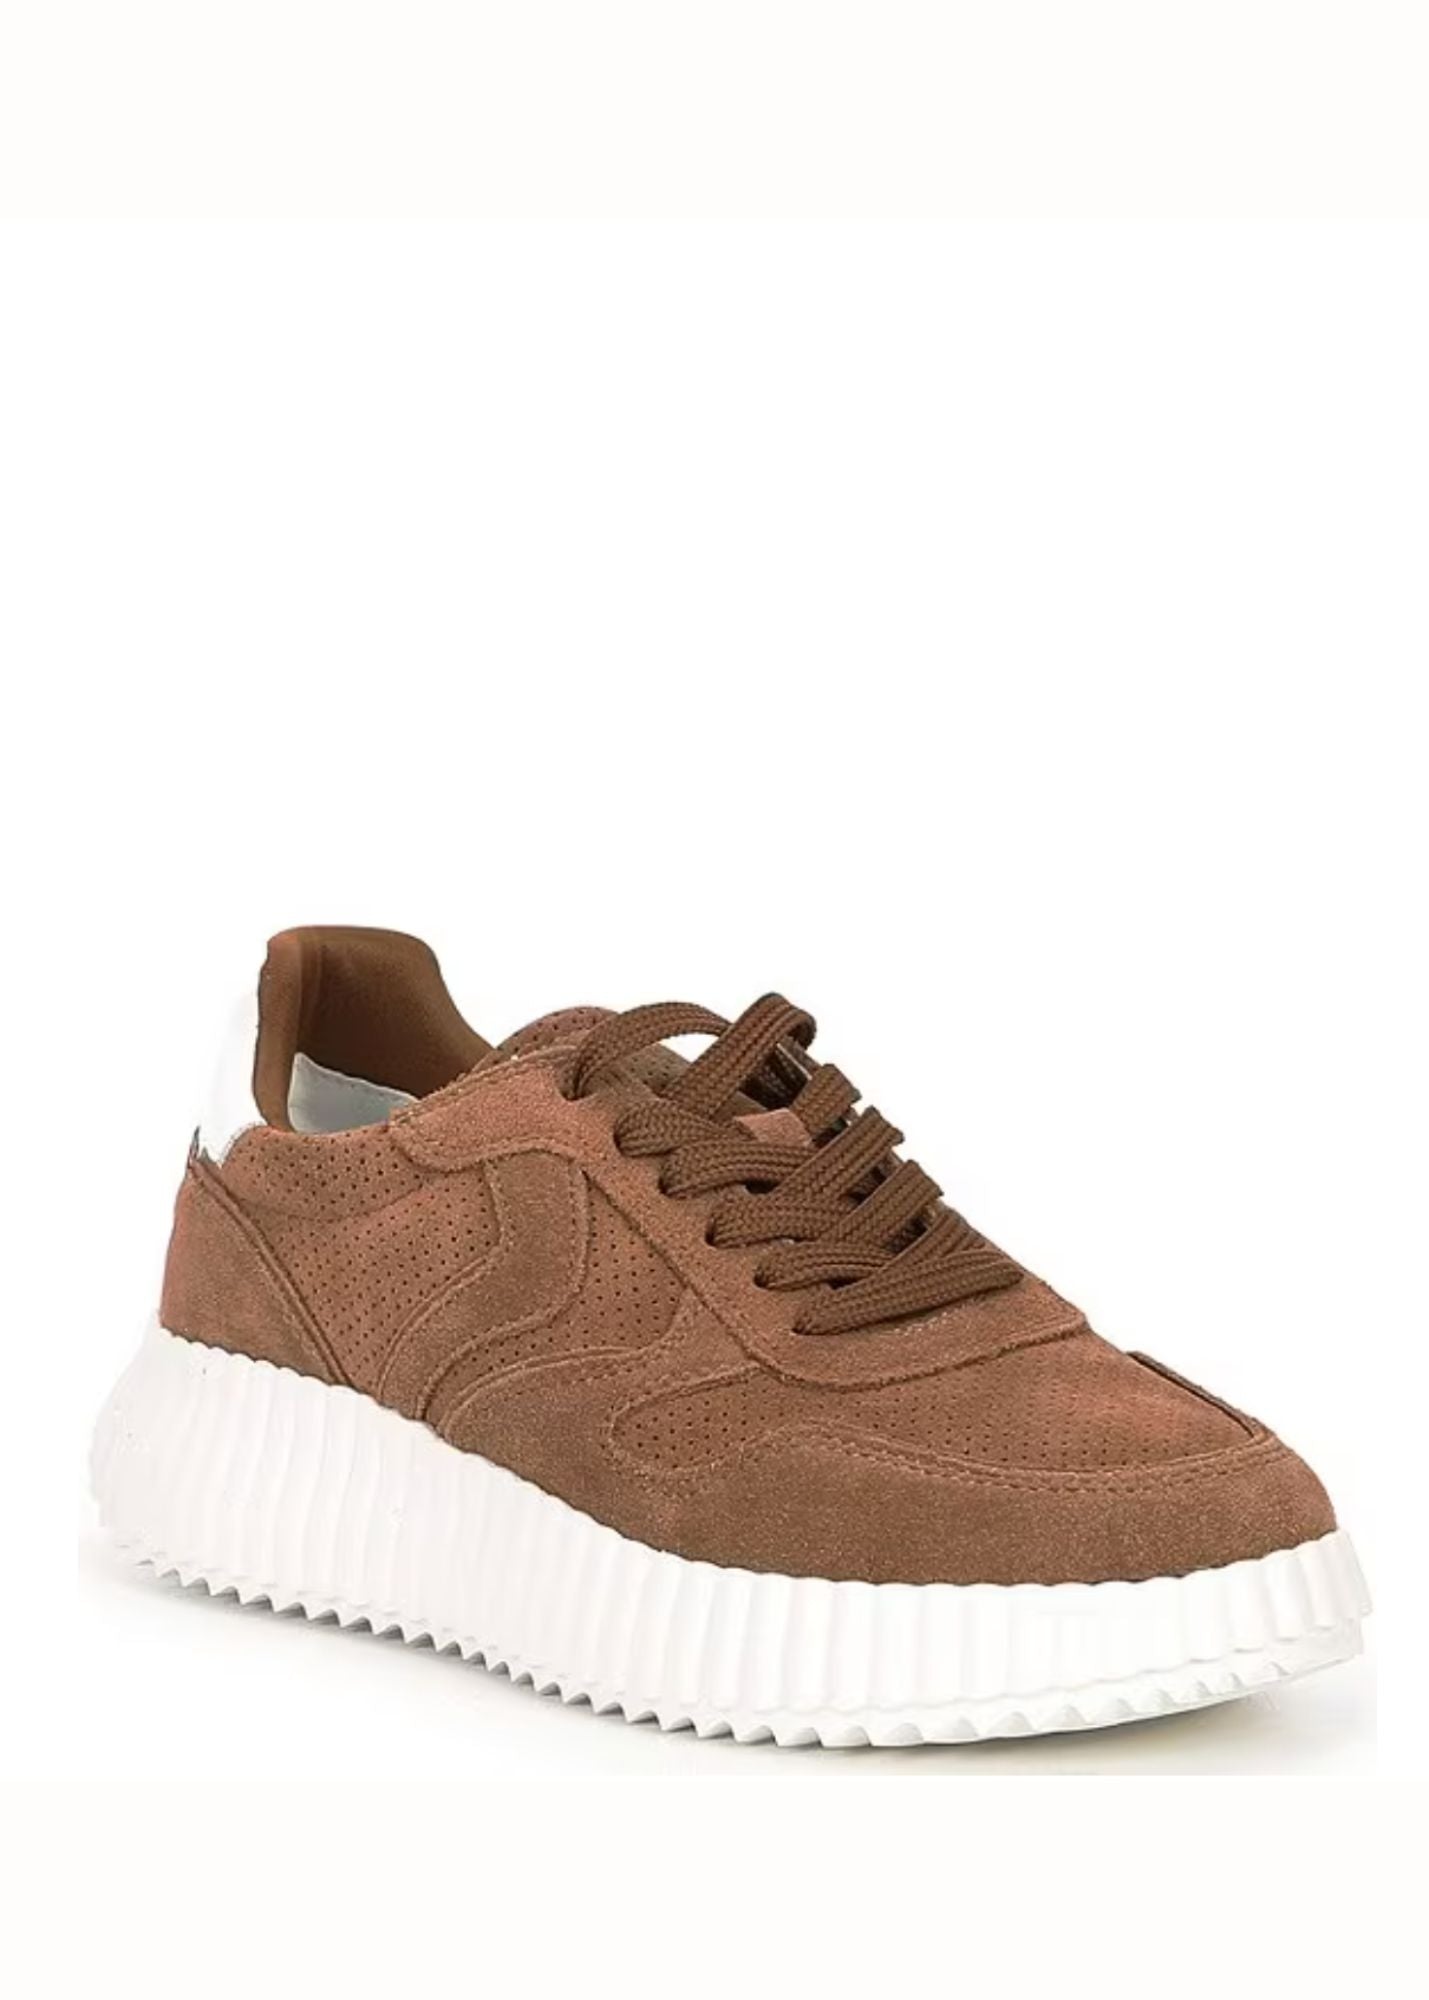 Steve Madden Shereen Suede Sneakers Shoes